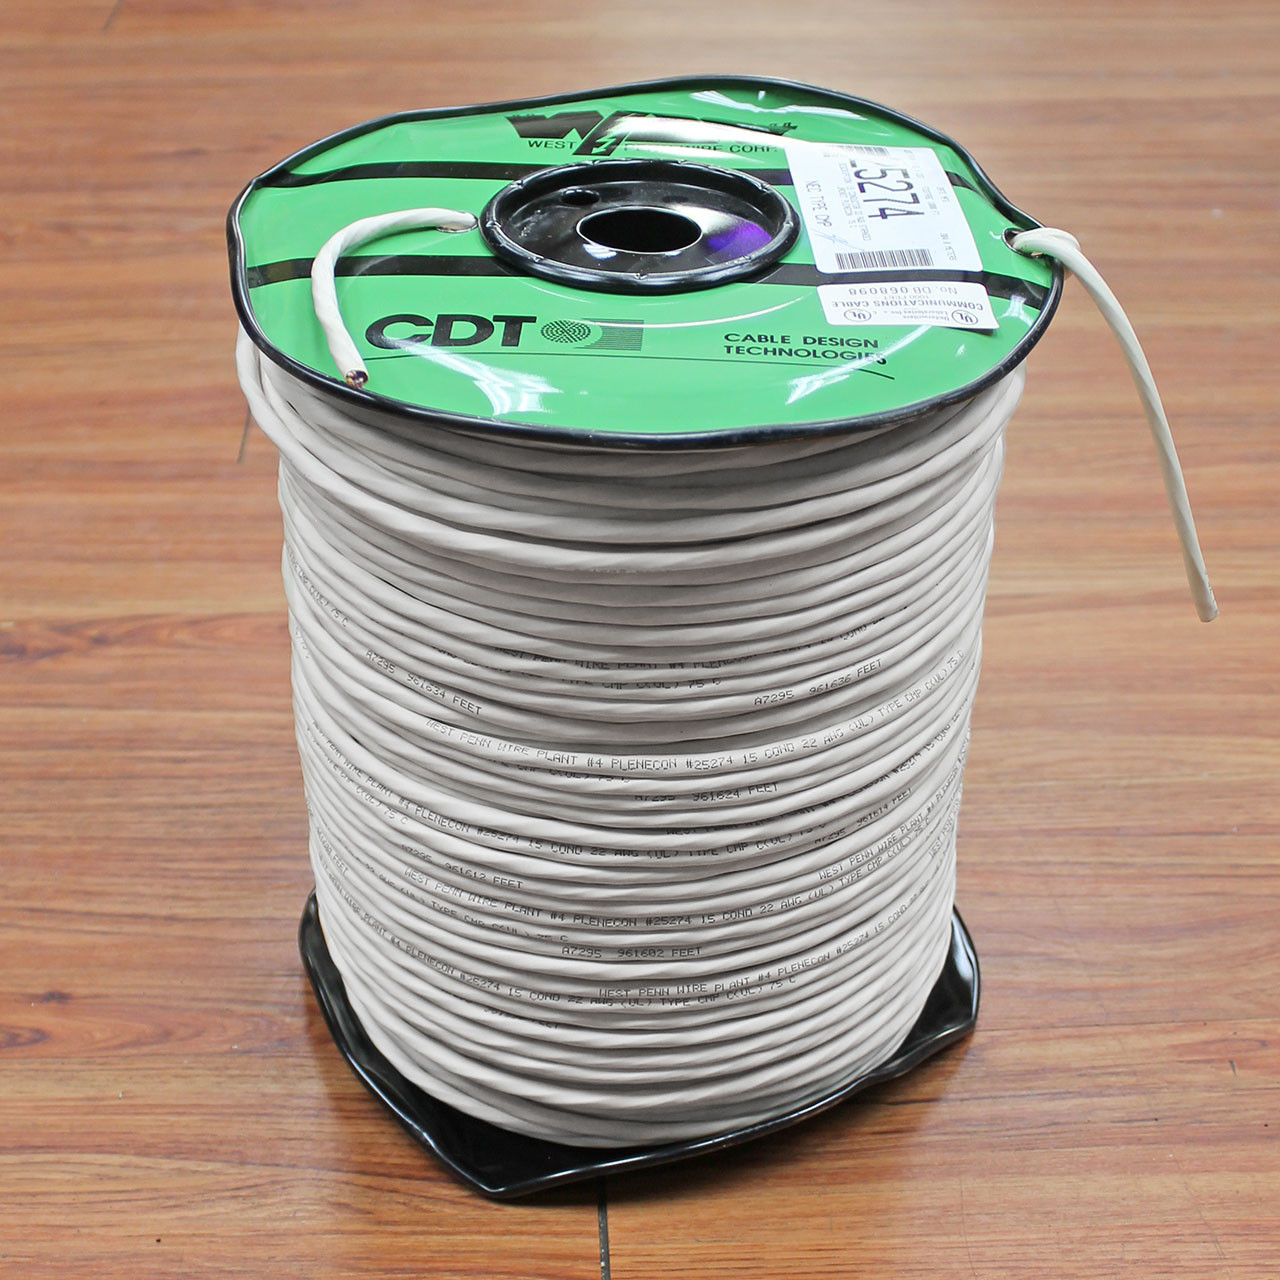 22 gauge 4-conductor wire (Sold by the foot)